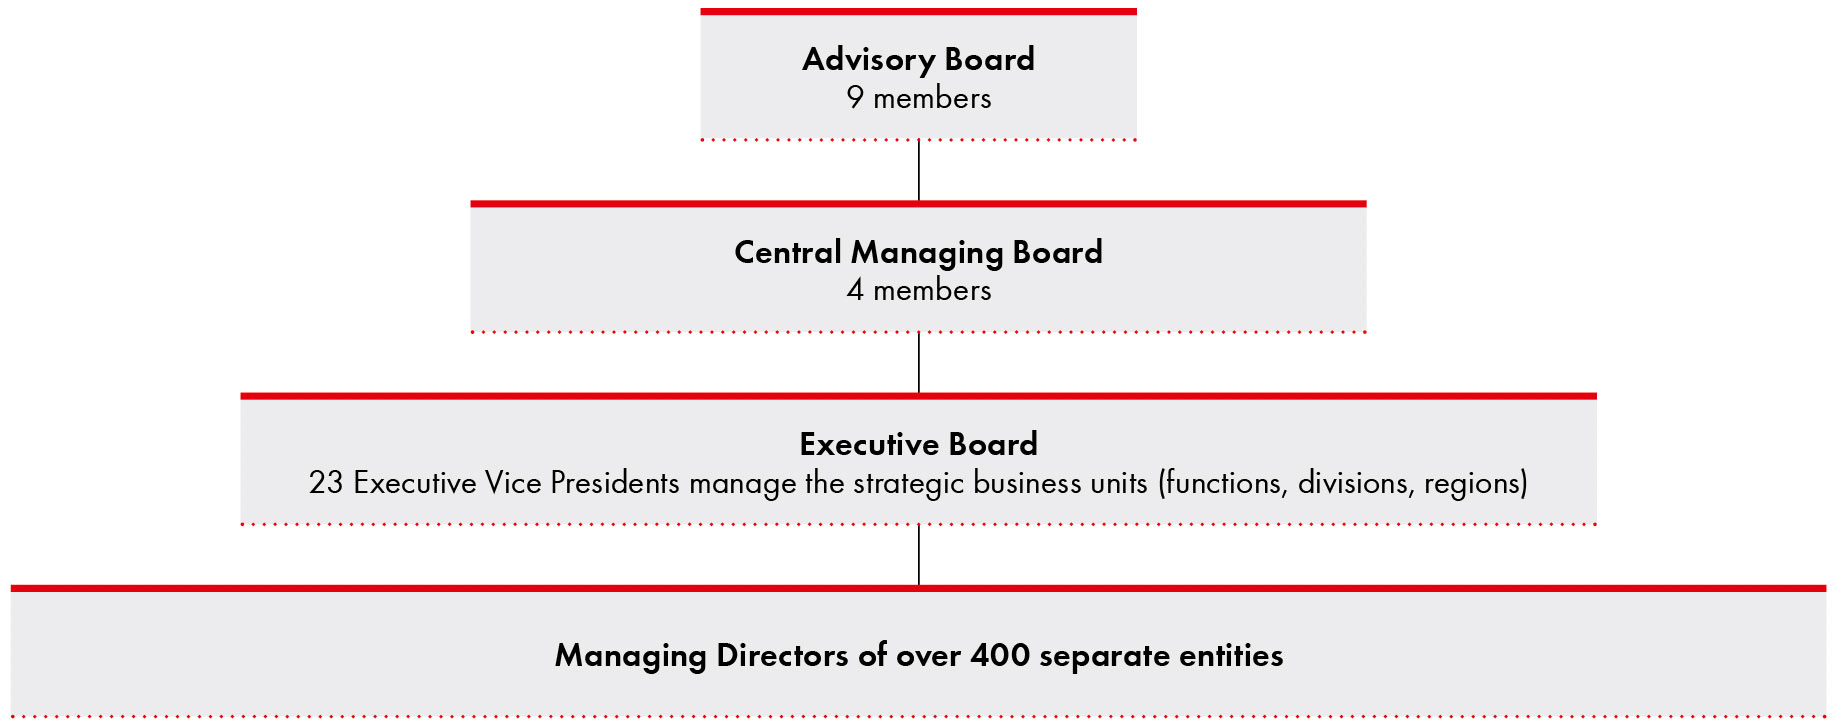 Organizational structure of the Würth Group